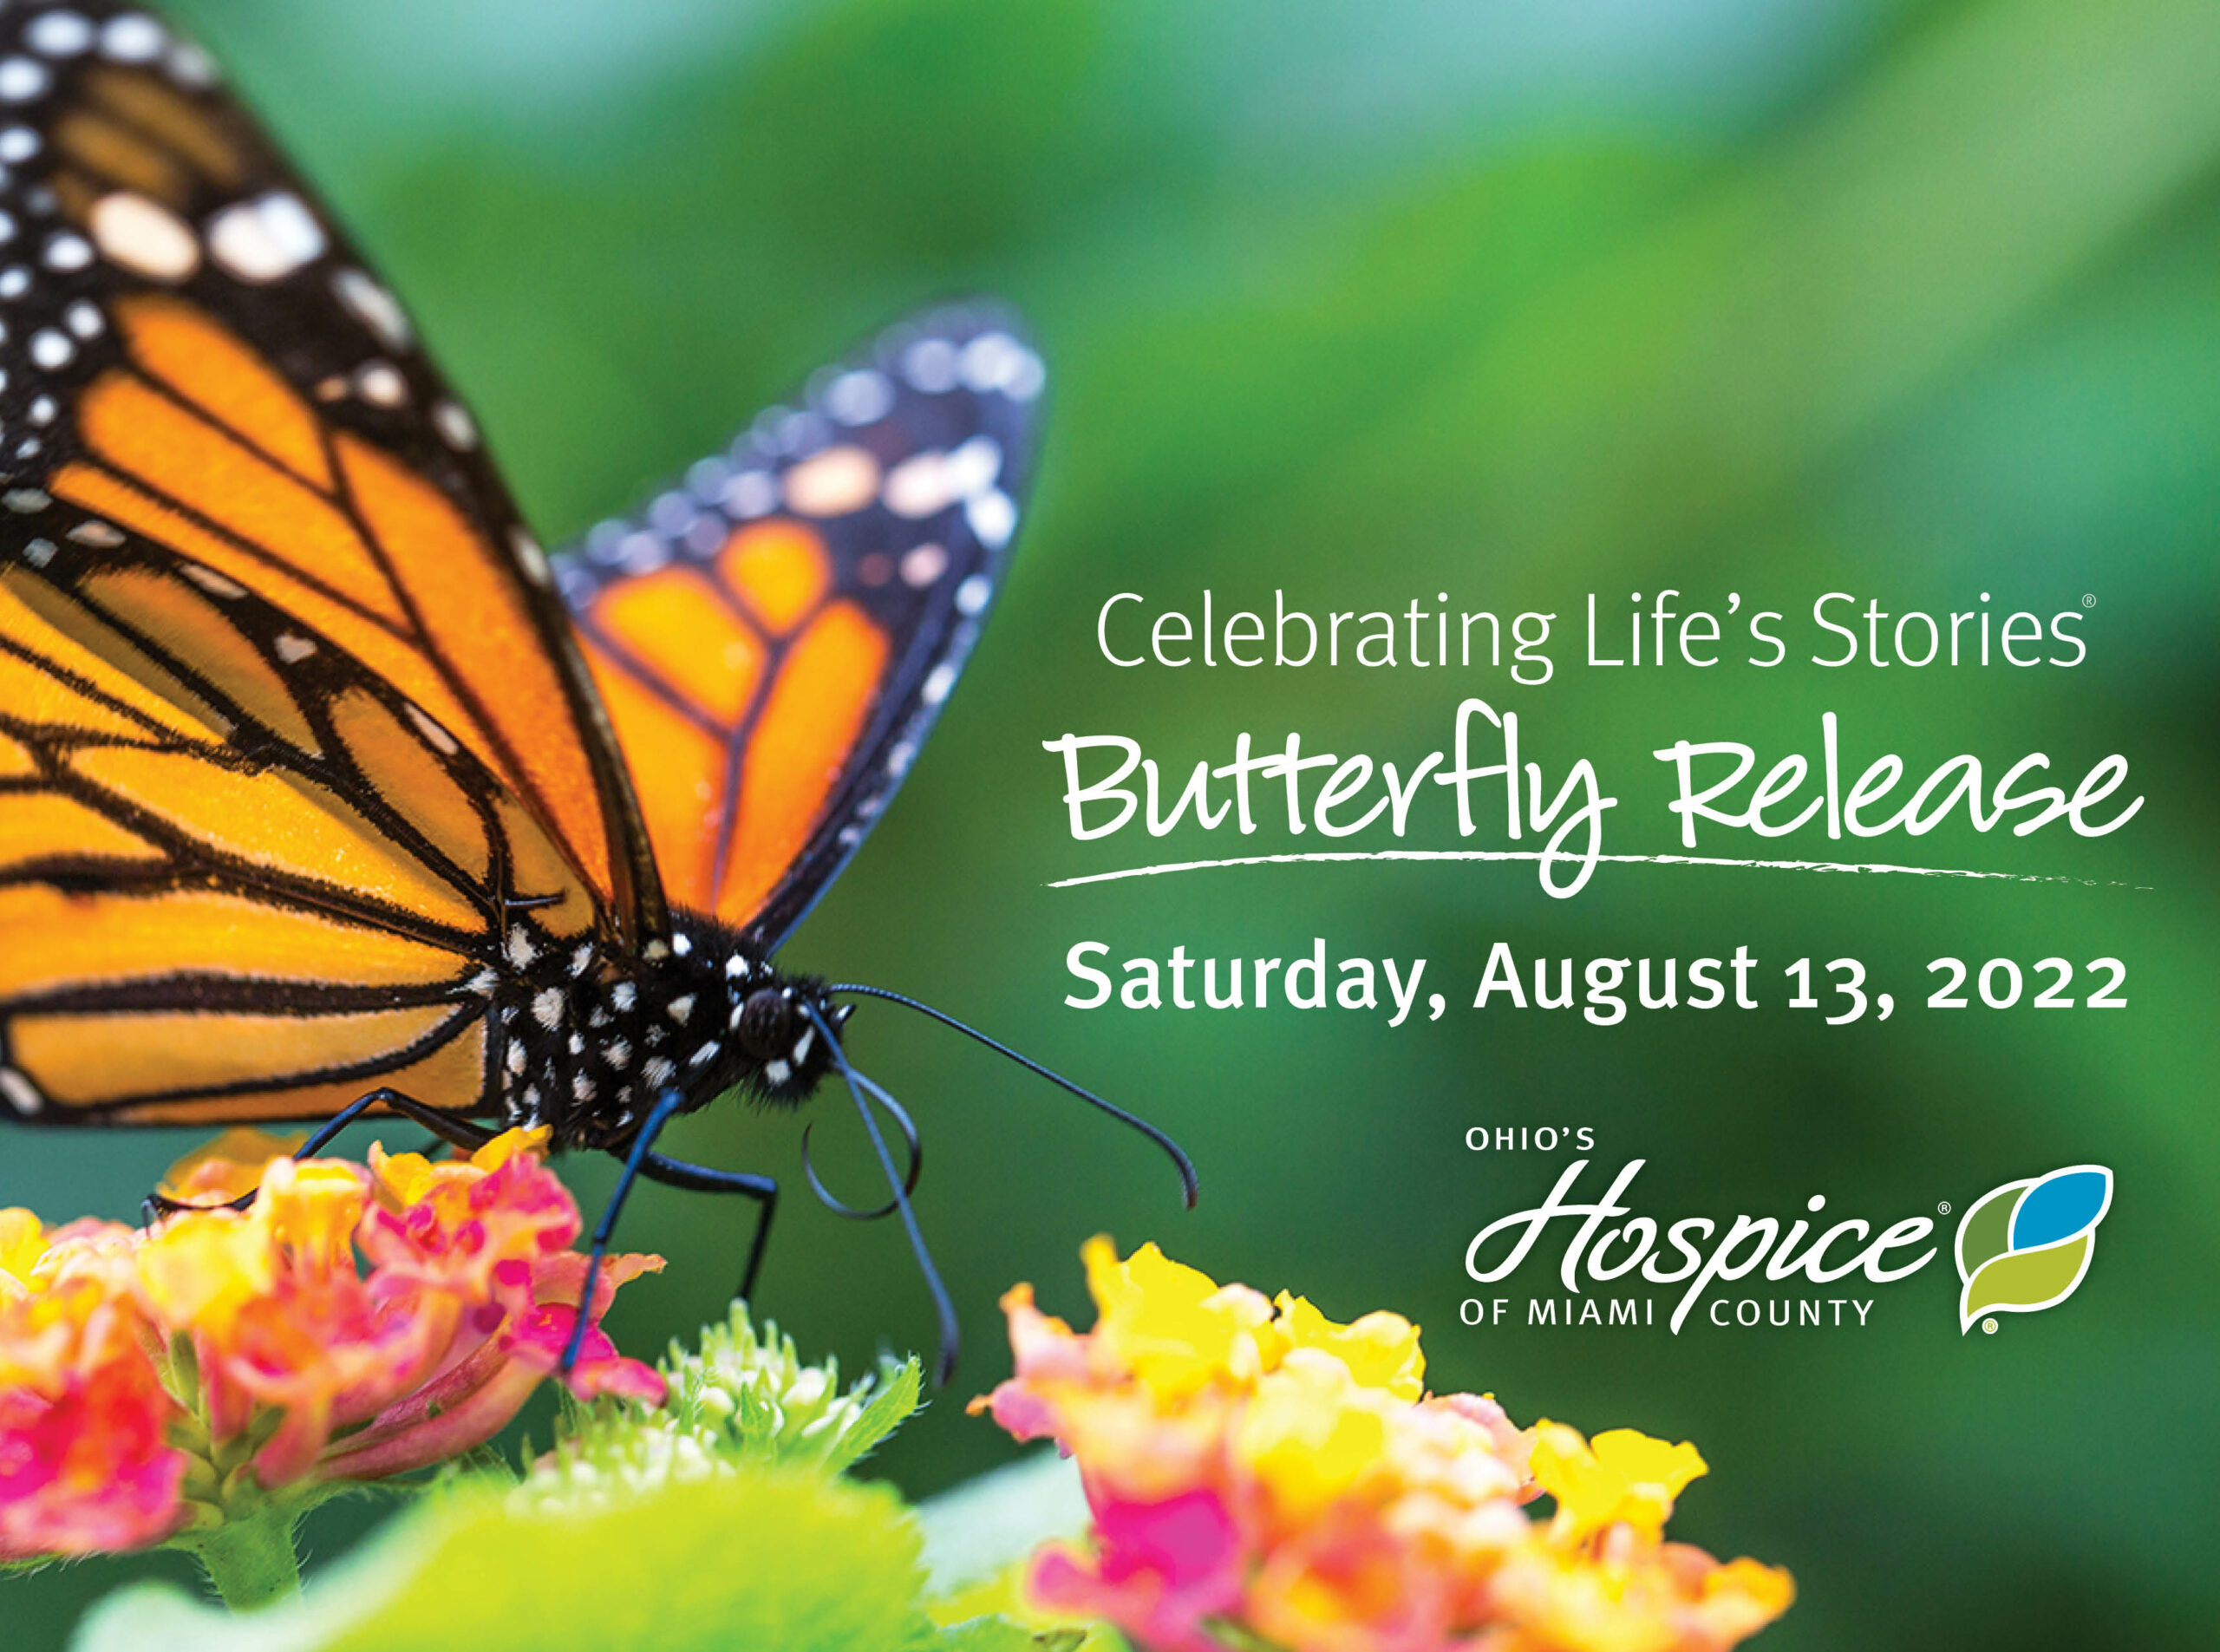 Ohio's Hospice of Miami County Butterfly Release